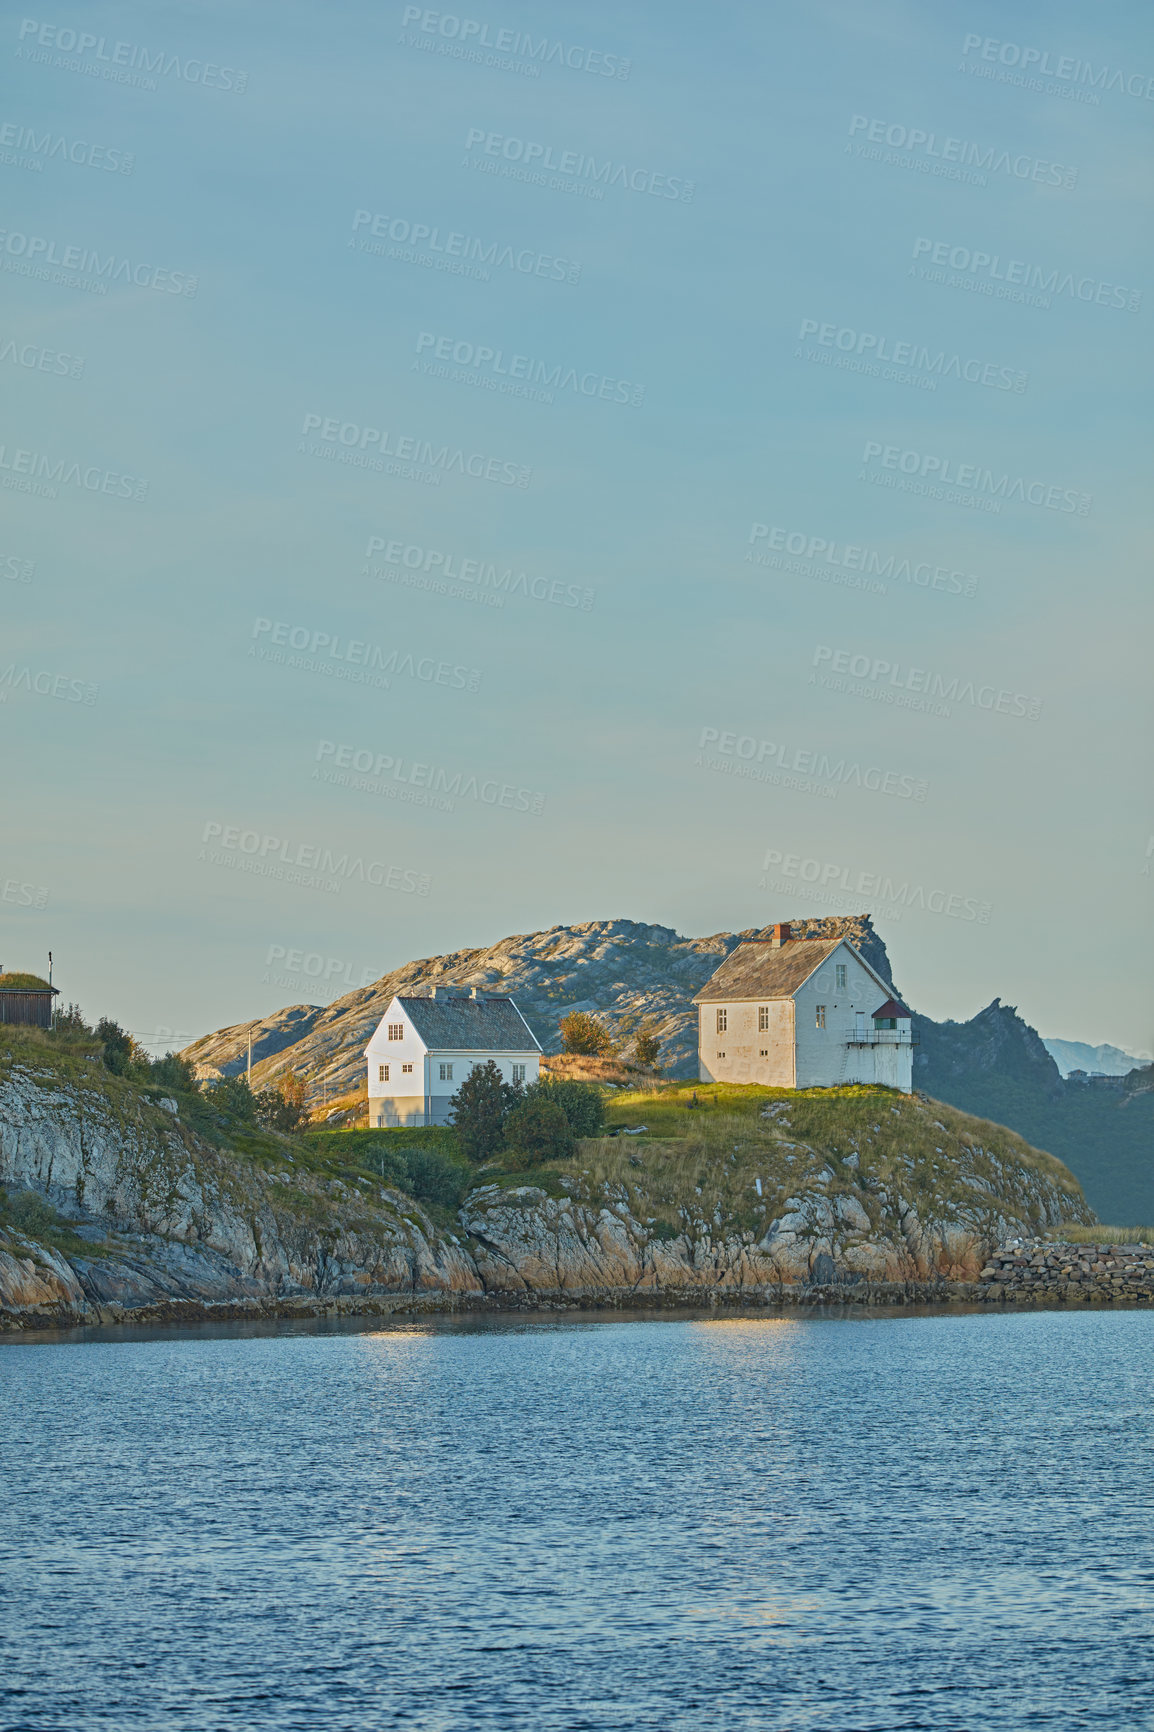 Buy stock photo A lighthouse or holiday home by the lake. An old museum called Nyholmen in Bodo or remote getaway house on a mountain by the river. Landscape of an island with a historic building by the sea and sky